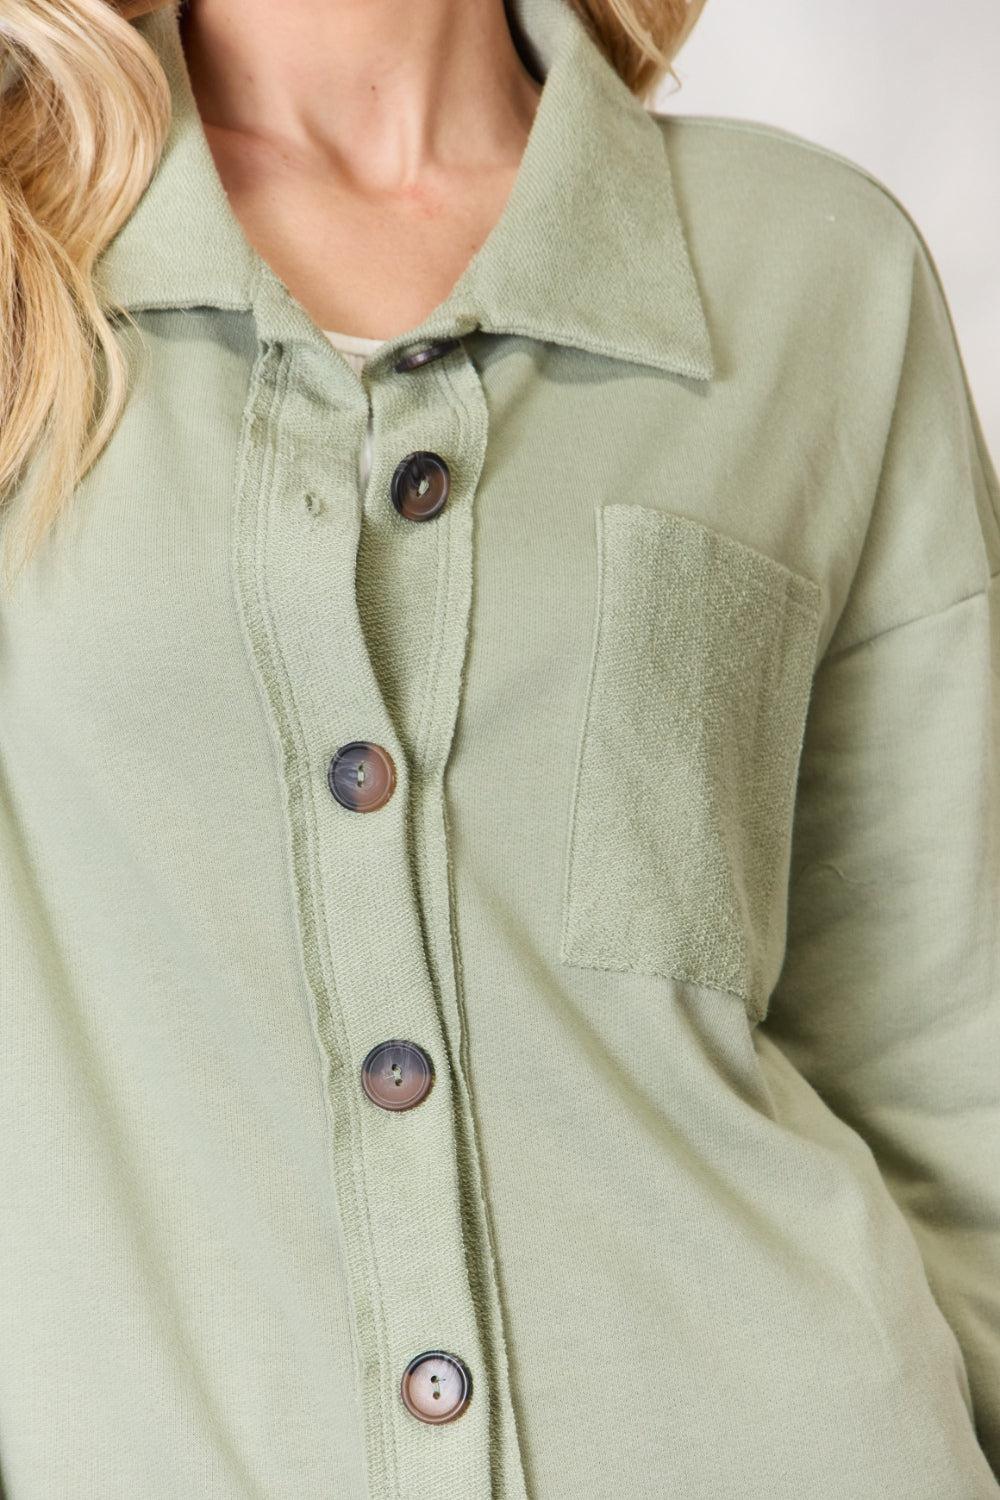 a woman wearing a green shirt with buttons